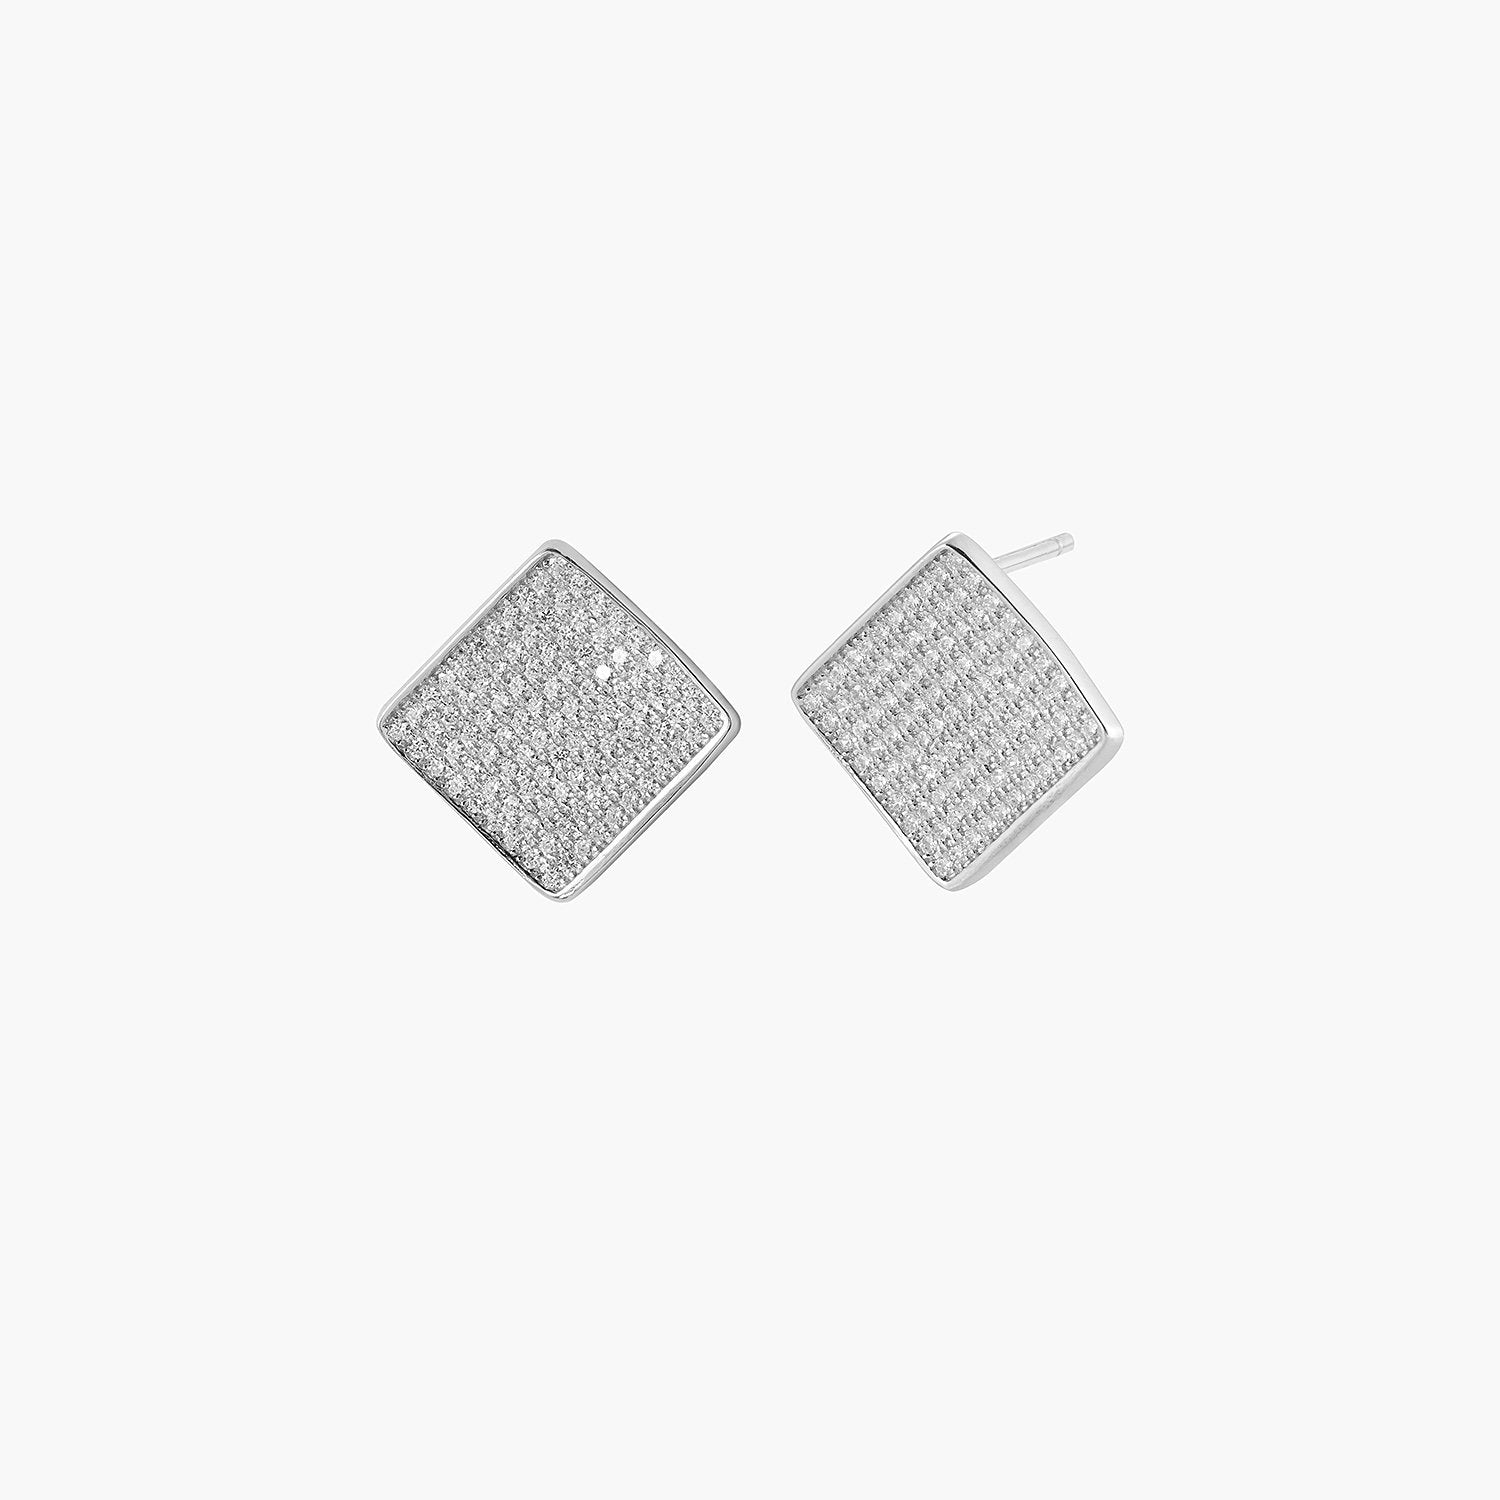 Pave Square Stud earrings